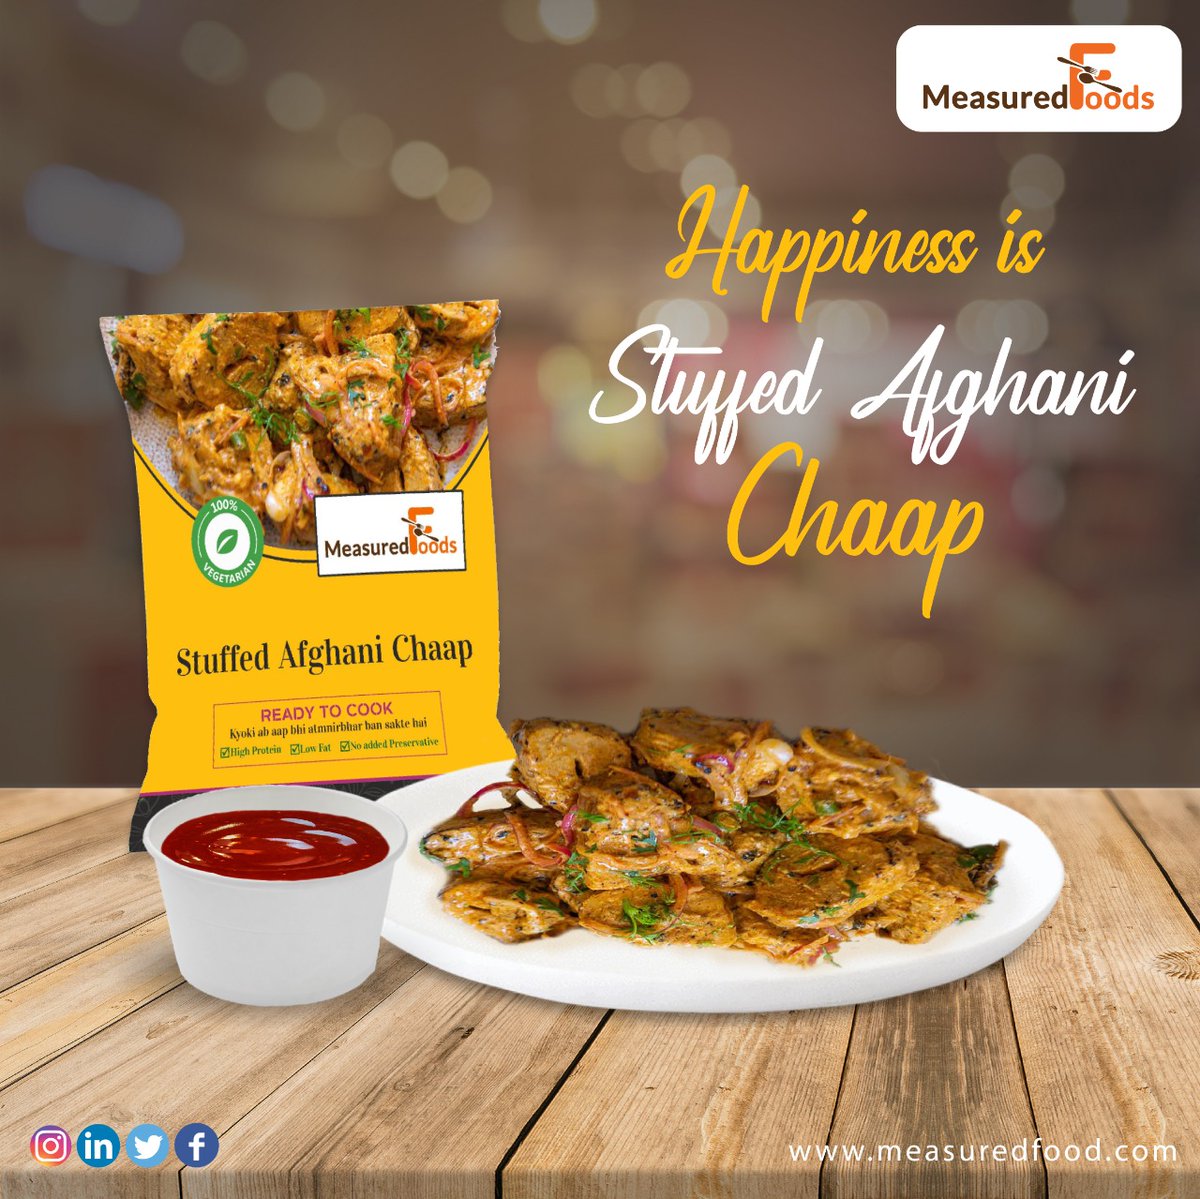 Whenever I hear the words from Measured food that our special and unique recipe is here.  I remember their Stuffed Afghani Chaap full of the magic of taste.

#soyachaap #chaap #foodphotography #foodie #foodblogger #measuredfood #packetfood #foodpacket #readytoeat #readytocook